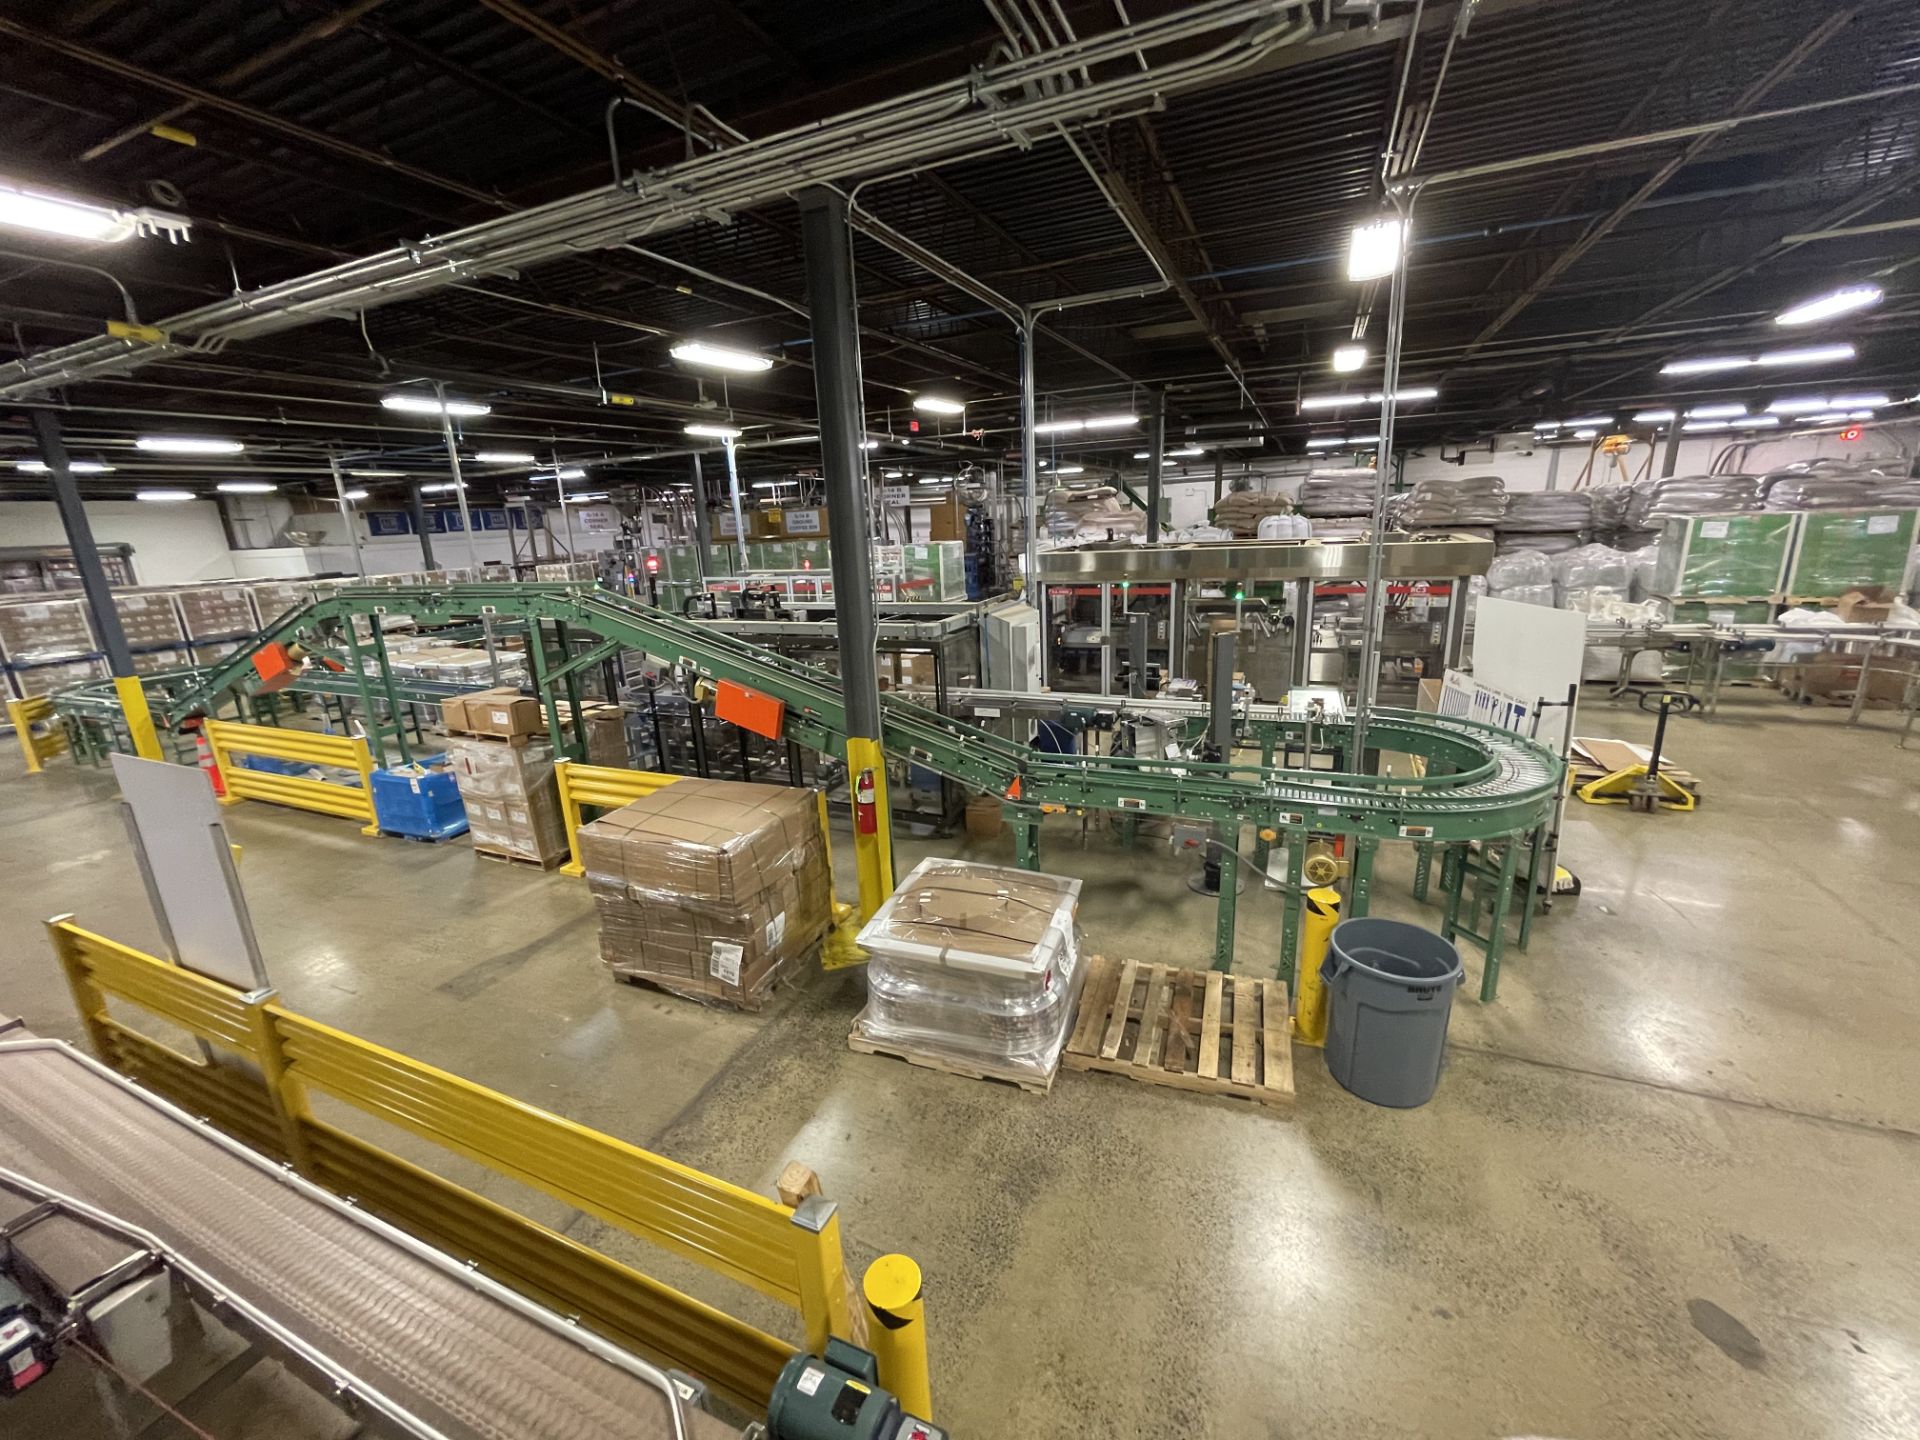 CASE CONVEYOR SYSTEMS ON PRODUCTION LINE (2019 MFG) (RIGGING: $3,000. LOCATED IN PITTSBURGH, PA)